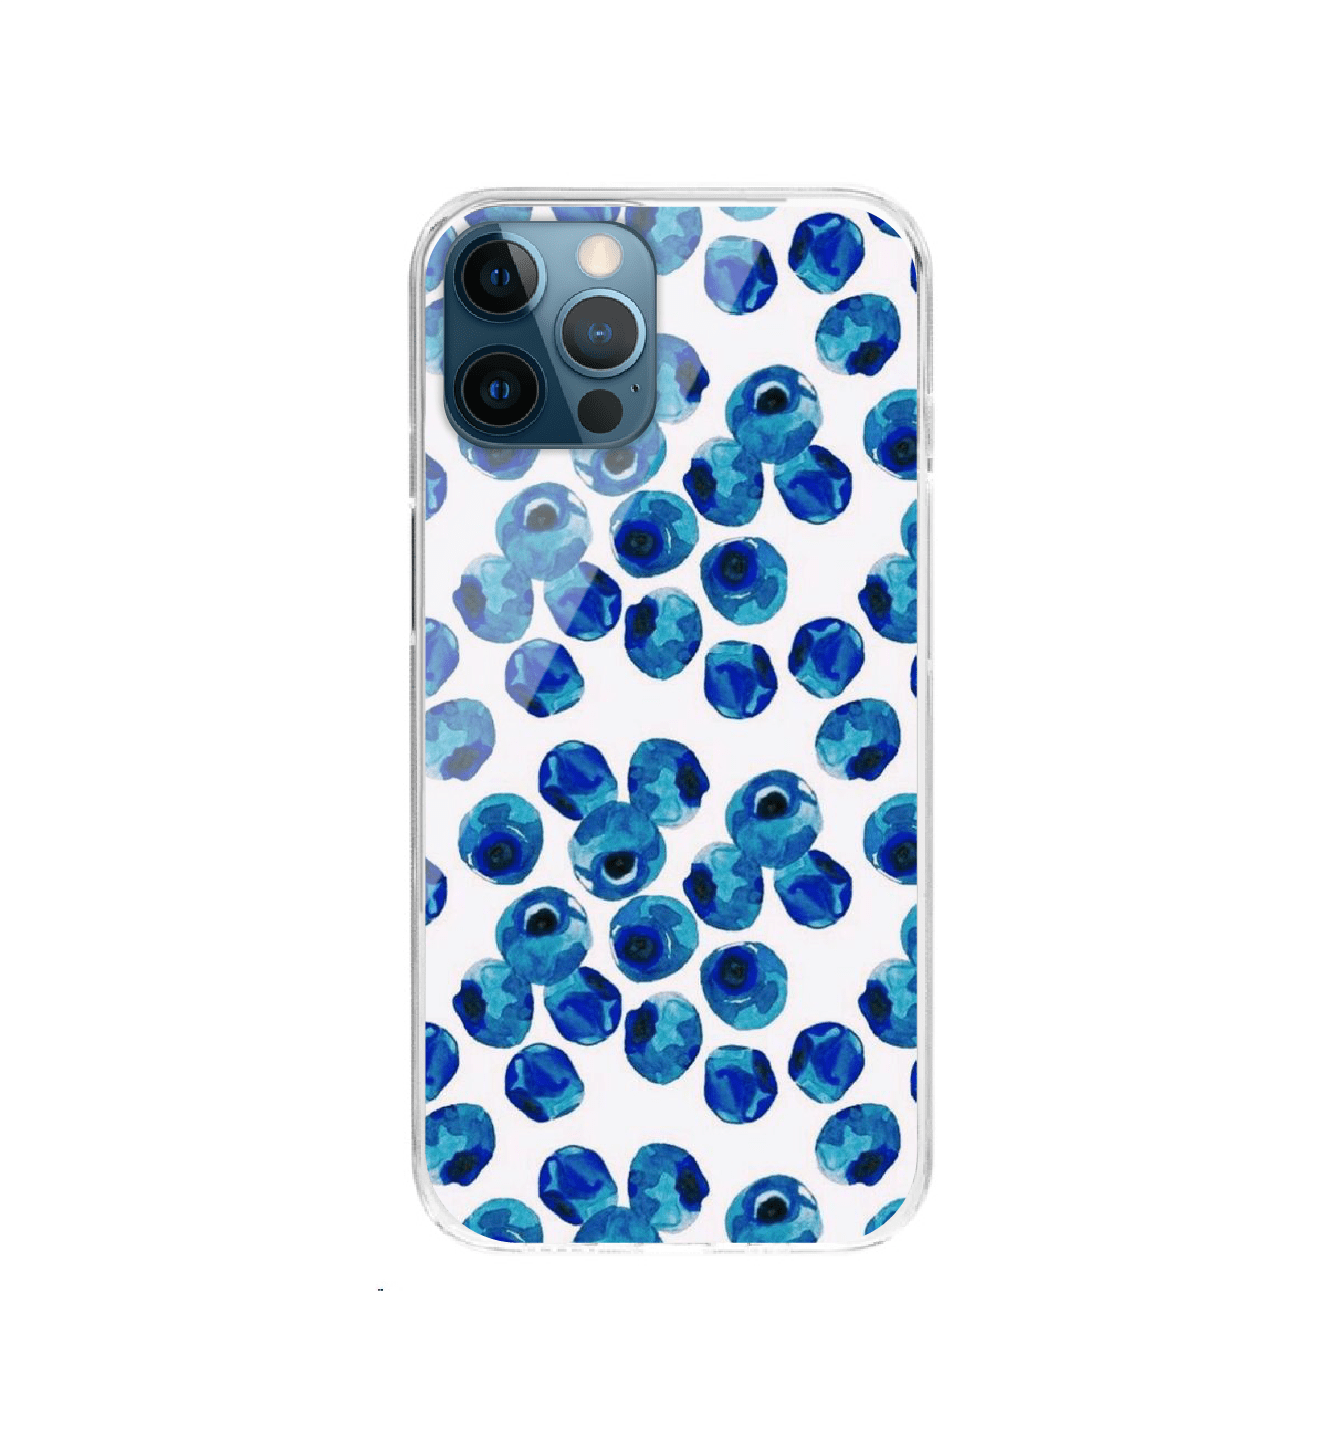 Blueberries - Silicon Case For Apple iPhone Models